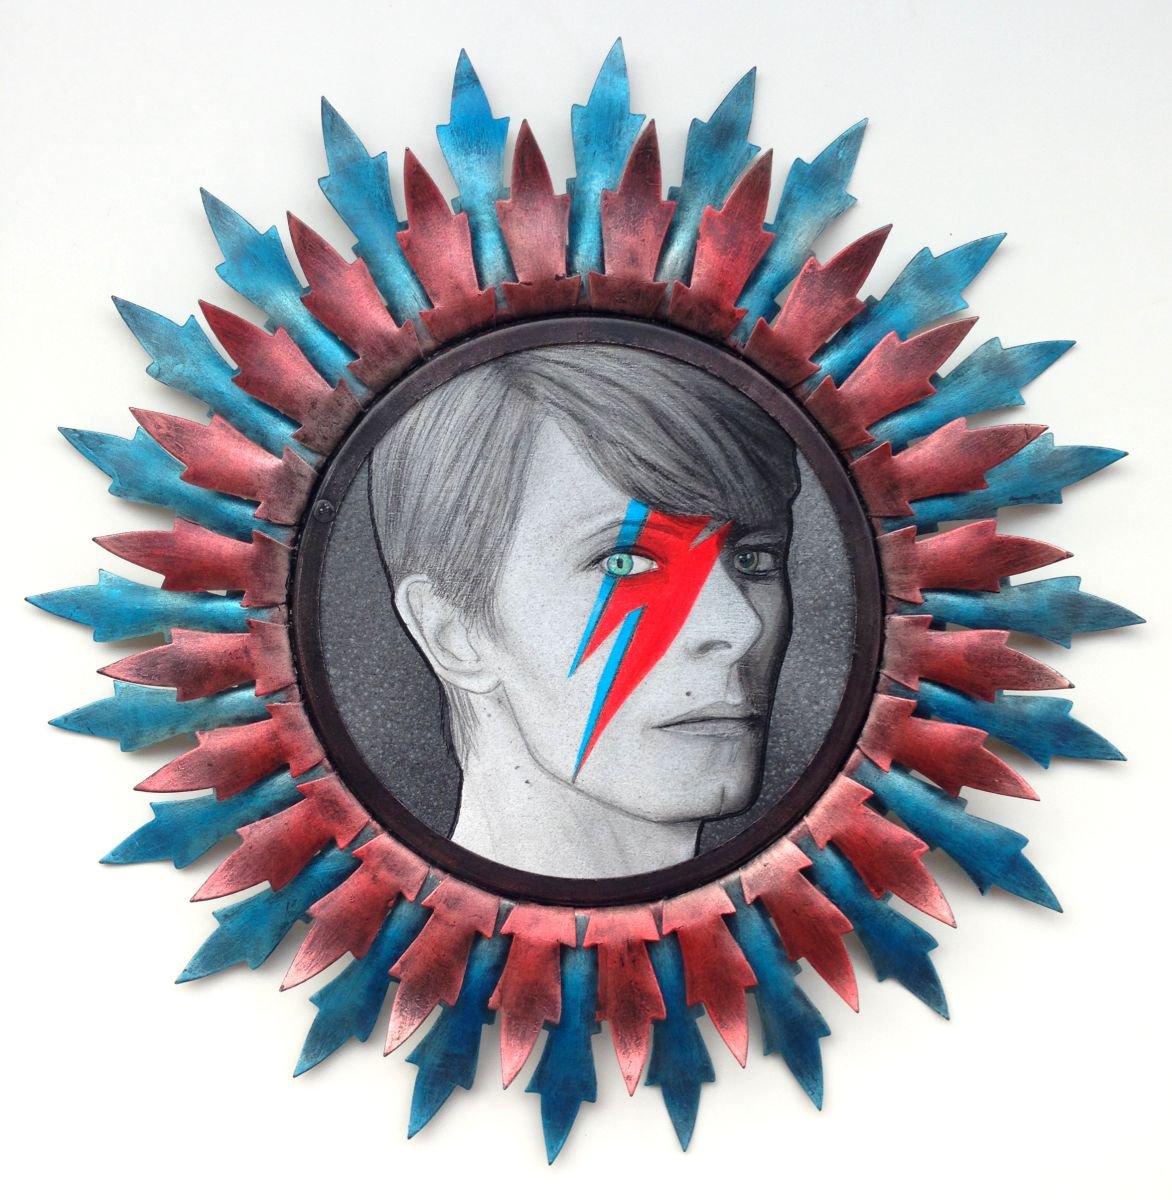 TRIBUTE TO DAVID BOWIE by Seguto